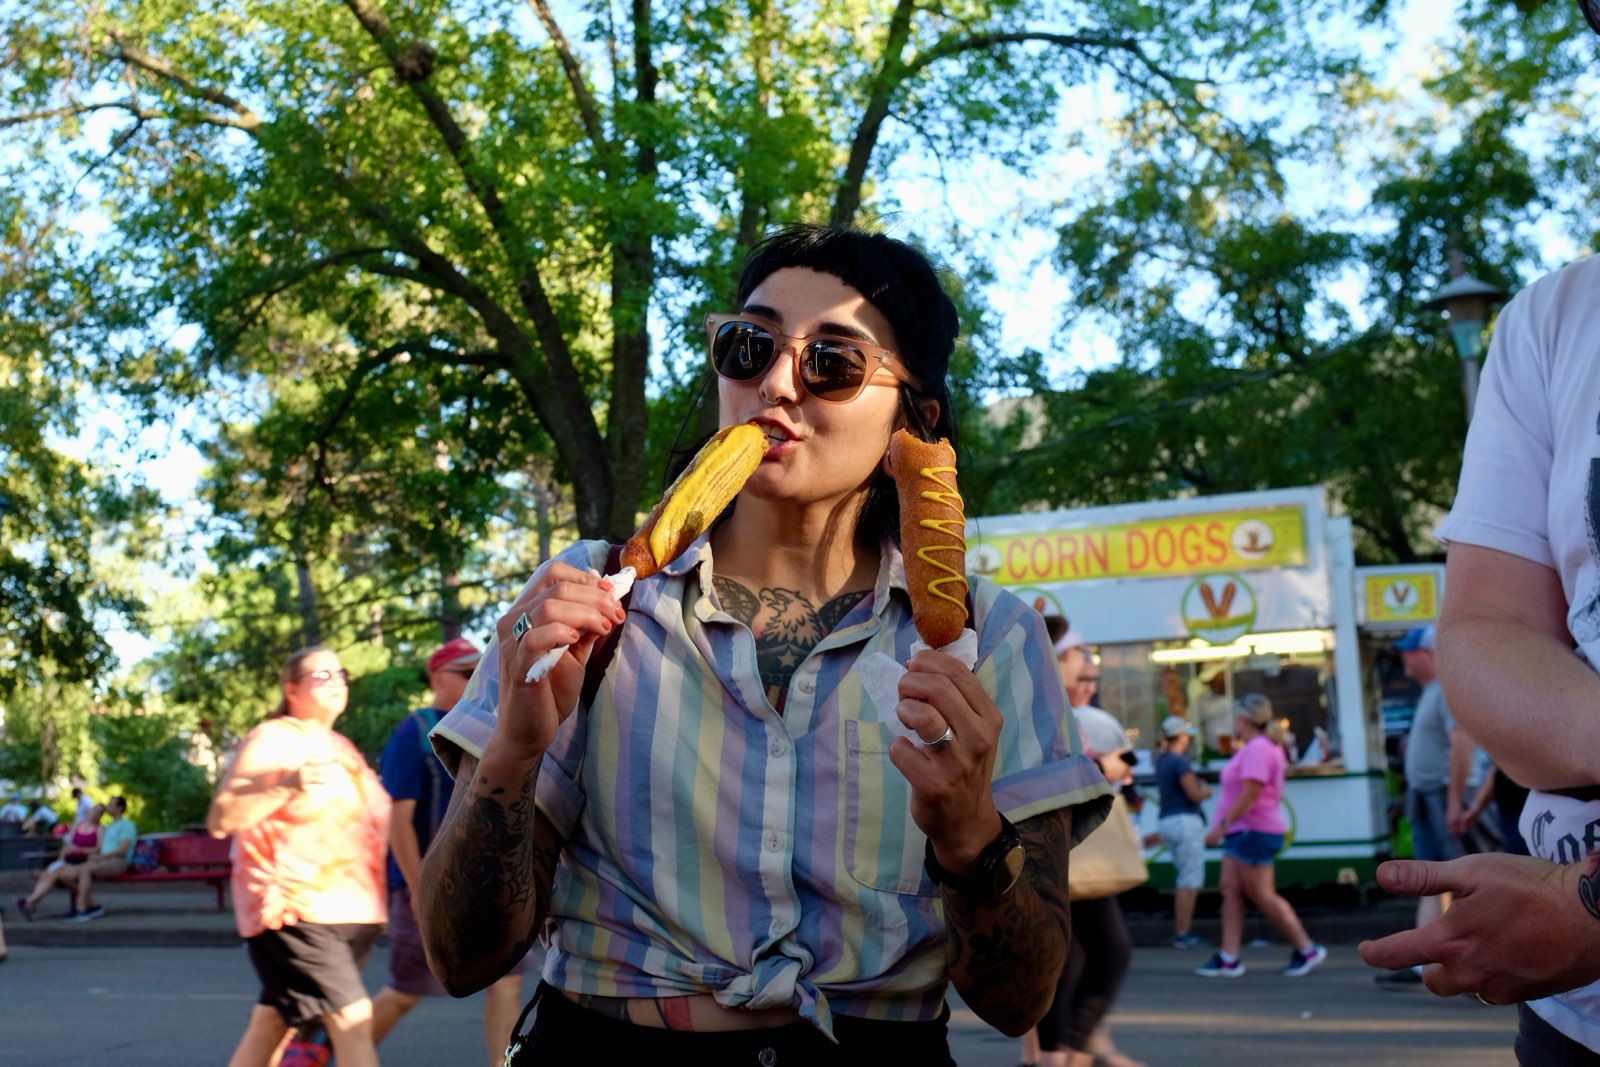 A hot dog expert holds two tube meats on sticks, one covered in mustard, and one with a thin drizzle of it